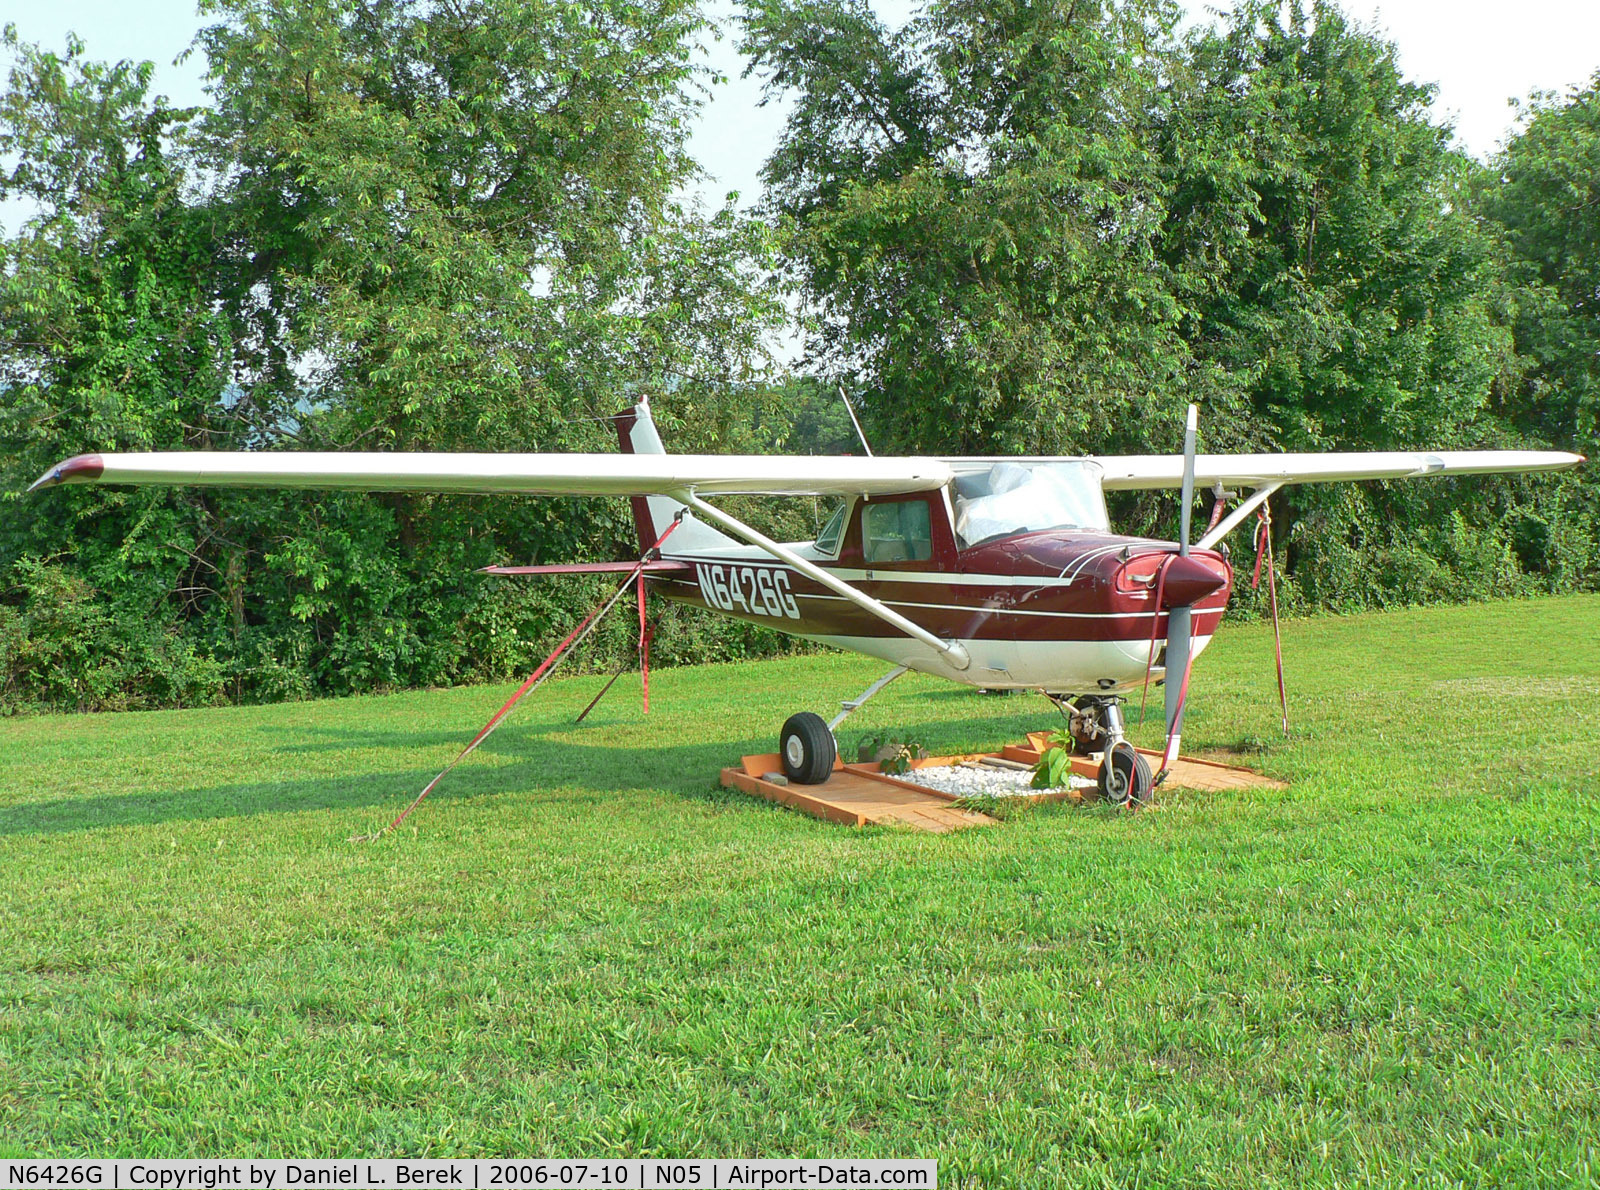 N6426G, 1970 Cessna A150K Aerobat C/N 15071926, This 1970 Cessna Aerobat is well cared for, indeed!